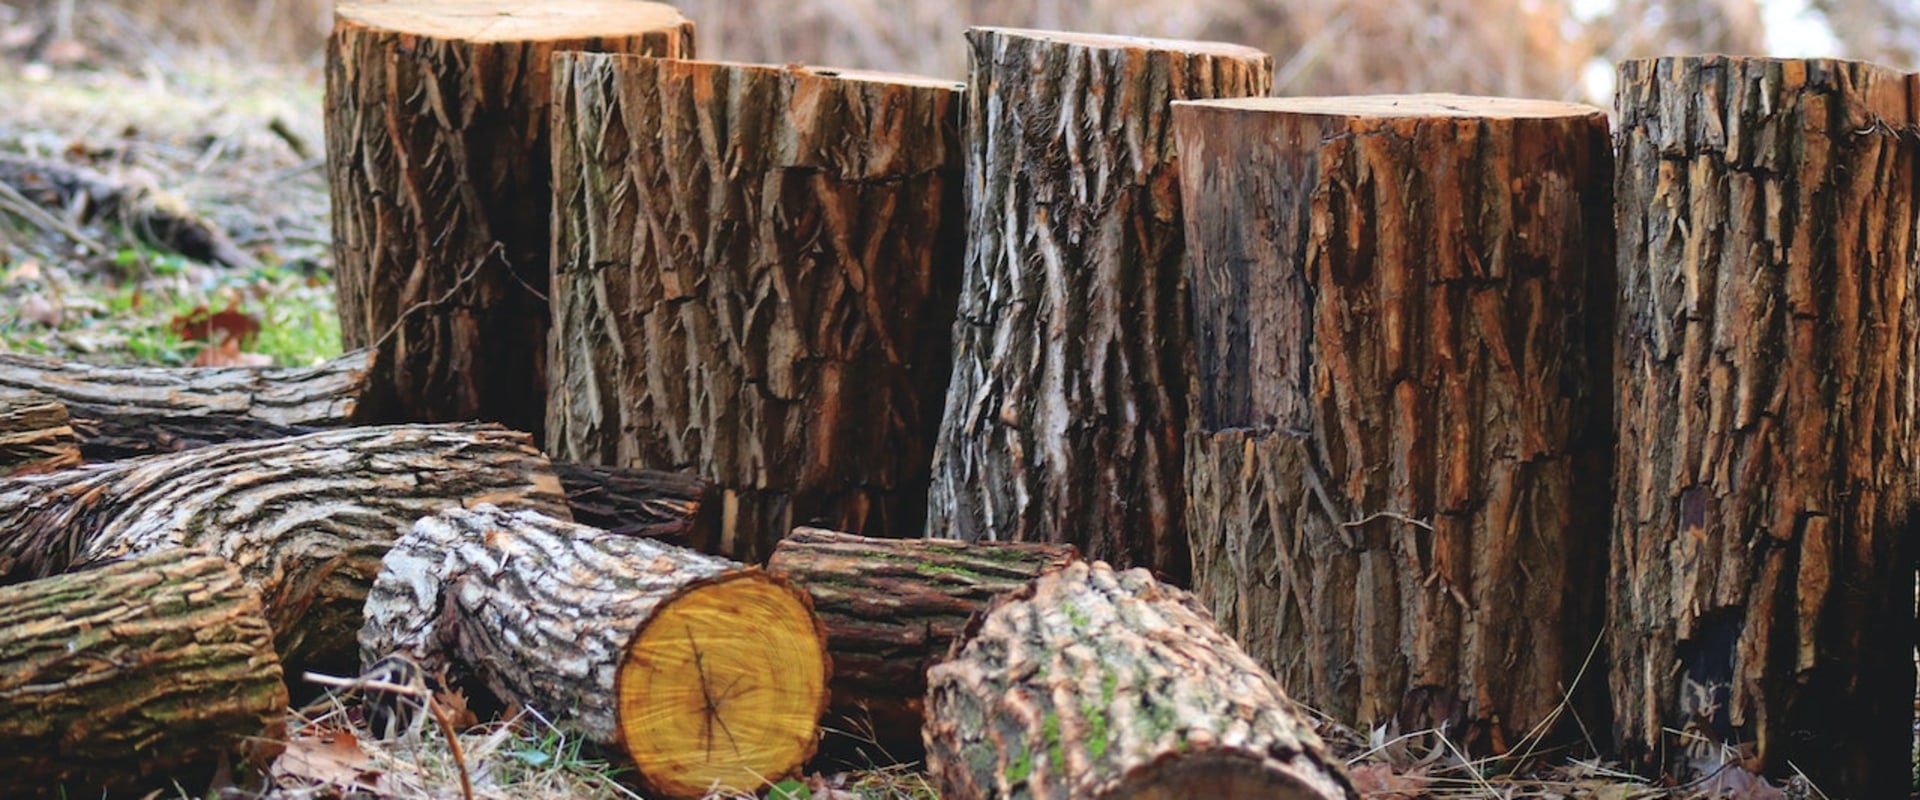 Stump Grinding In Mississippi: How Can A Landscaping Service Or A Tree Service Company Help You?